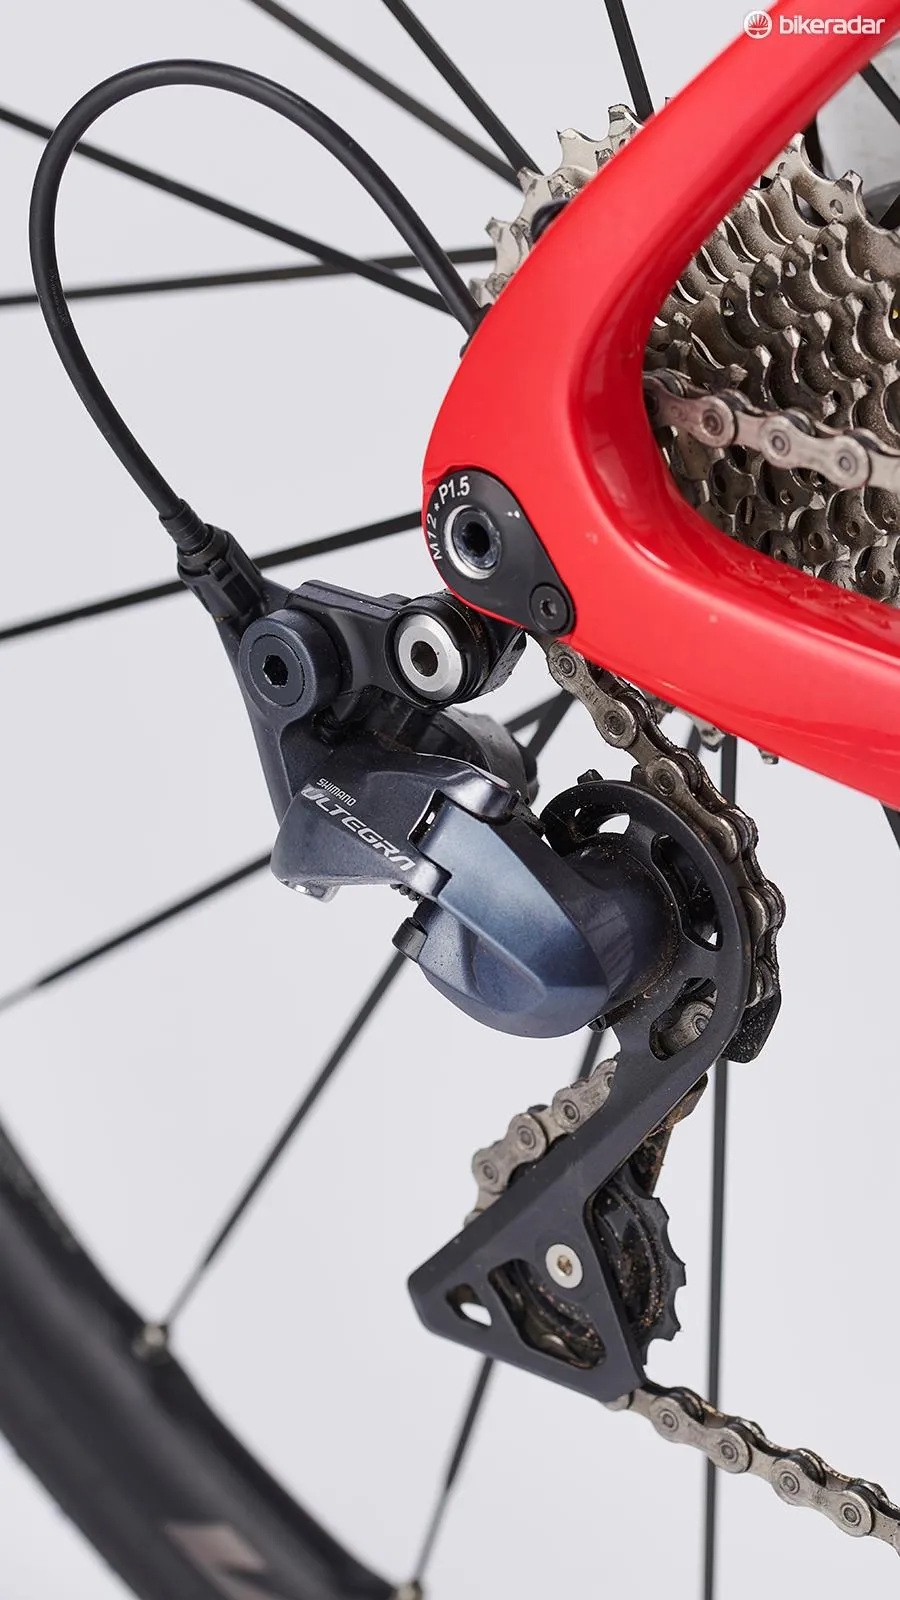 The Shimano Ultegra brakes are superb